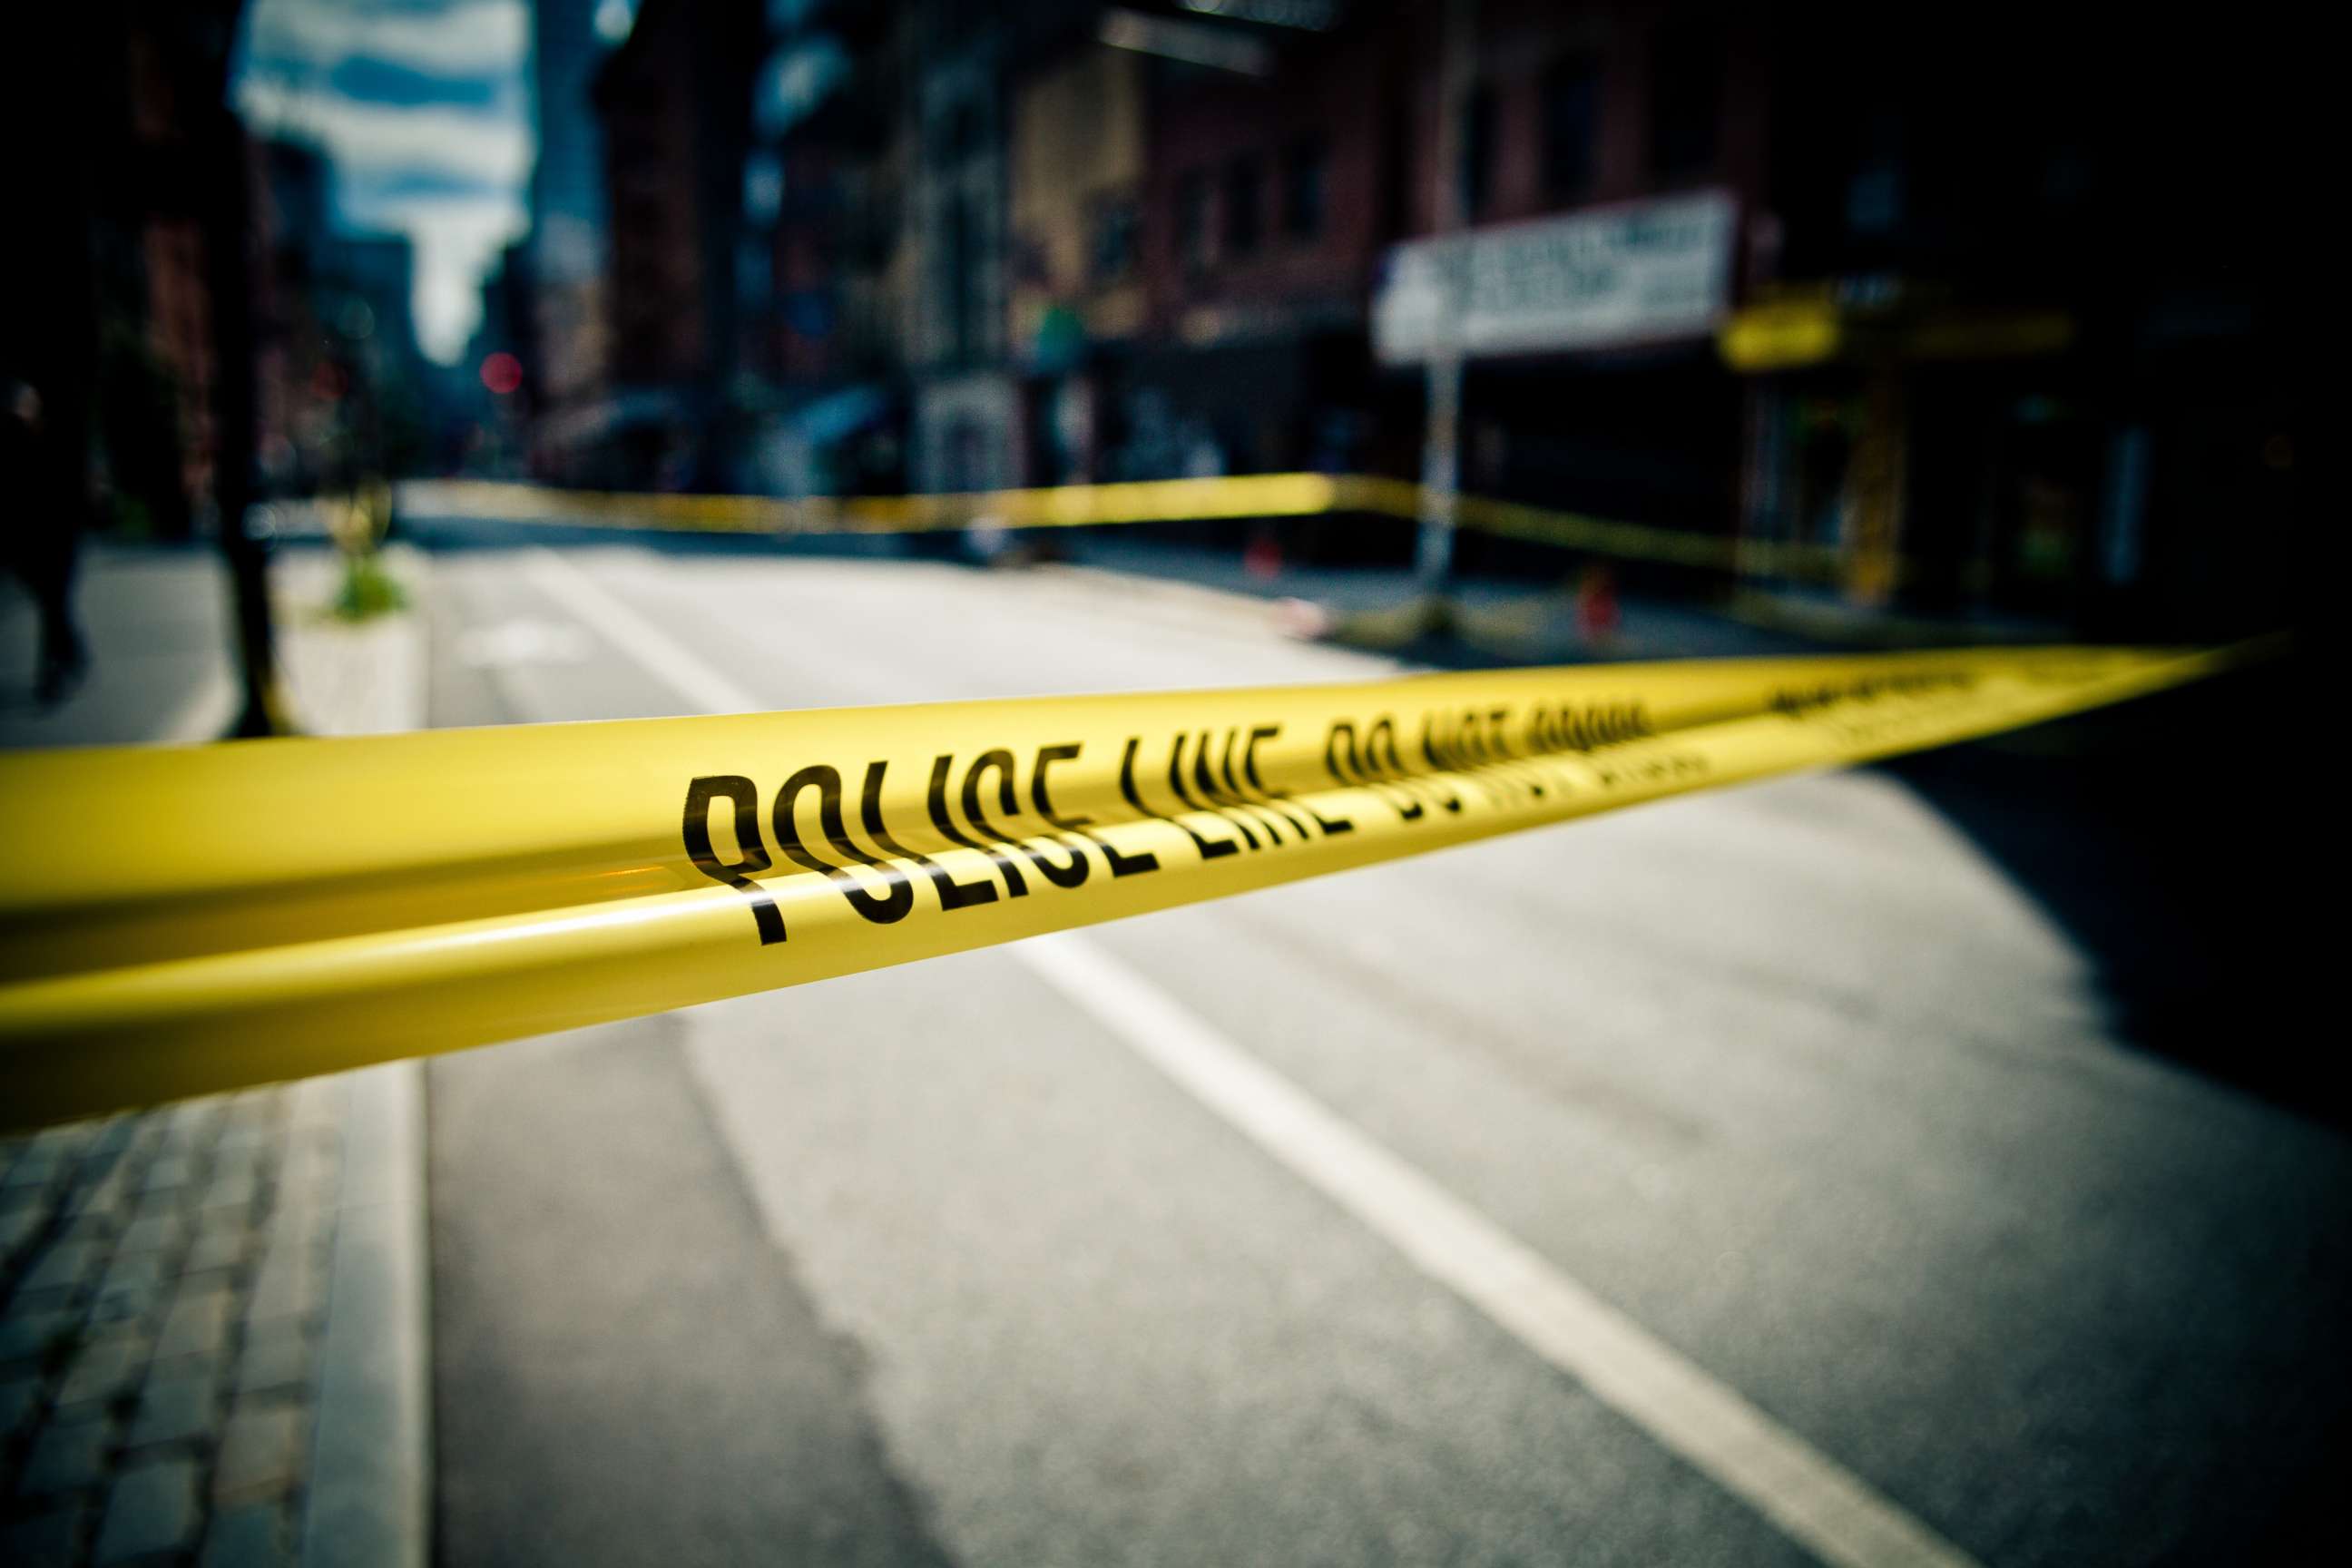 PHOTO: Police tape surrounds a neighborhood in this stock photo.